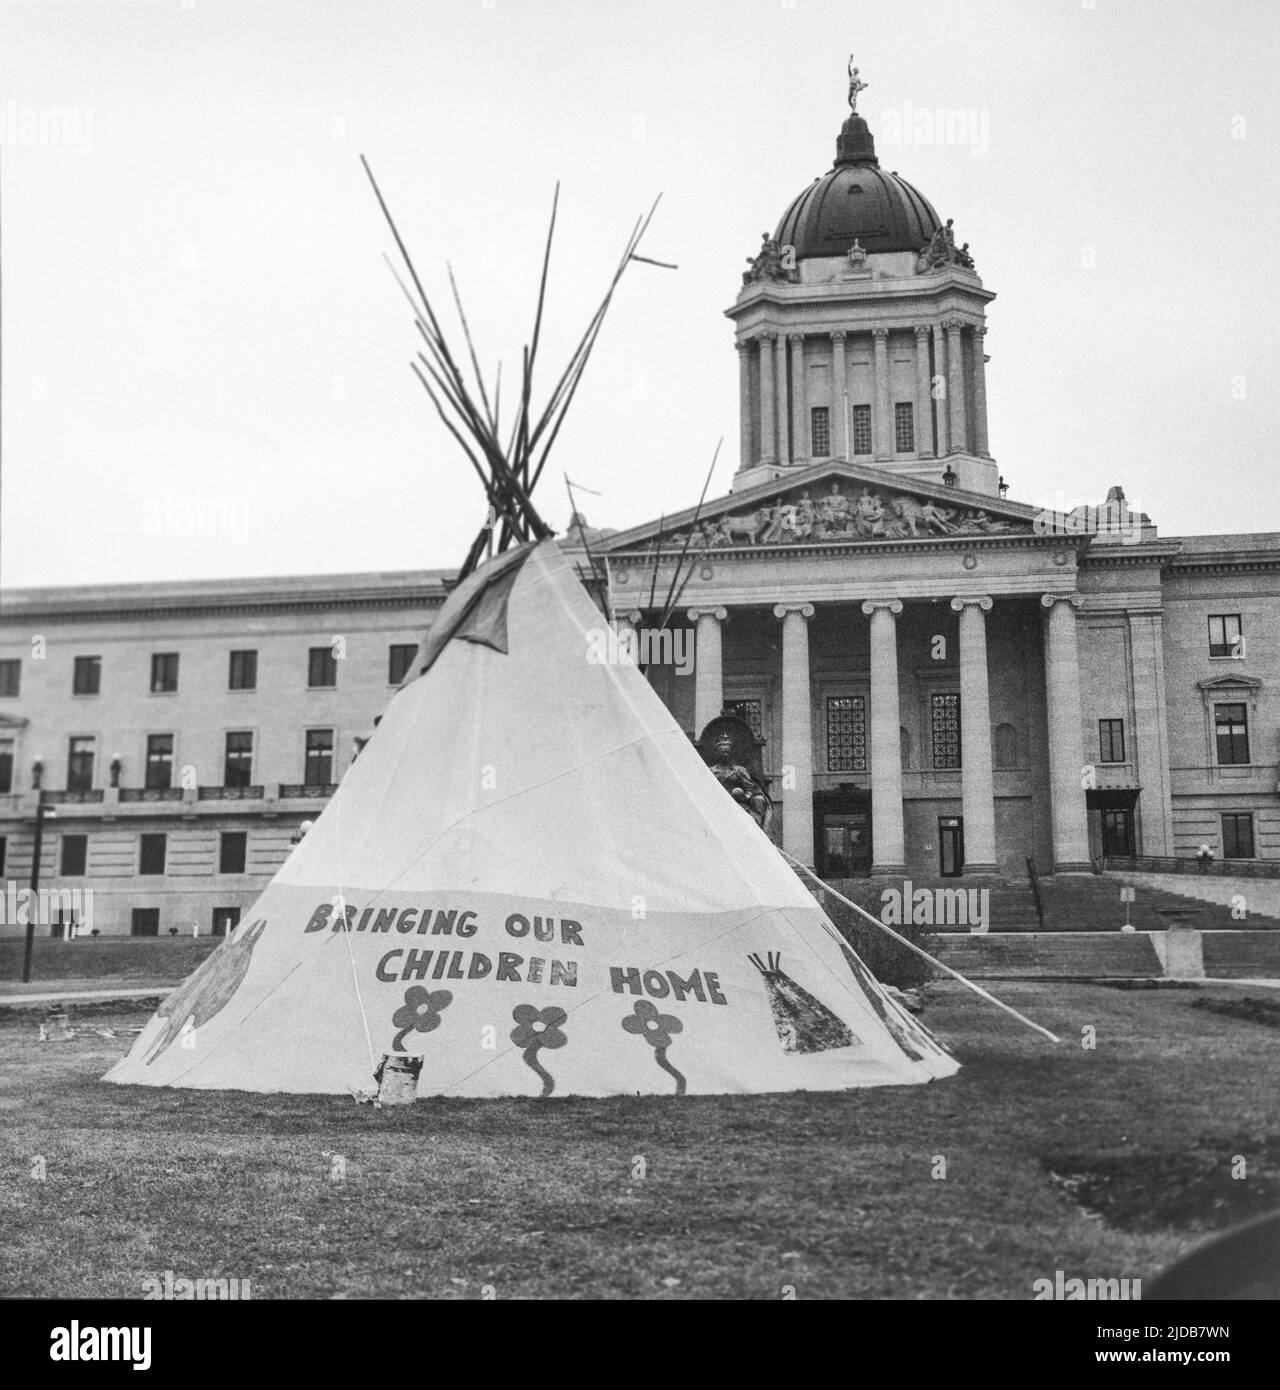 Teepee with the inscription 'Bringing Our Children Home' on the Manitoba Legistlative Grounds; Winnipeg, Manitoba, Canada Stock Photo